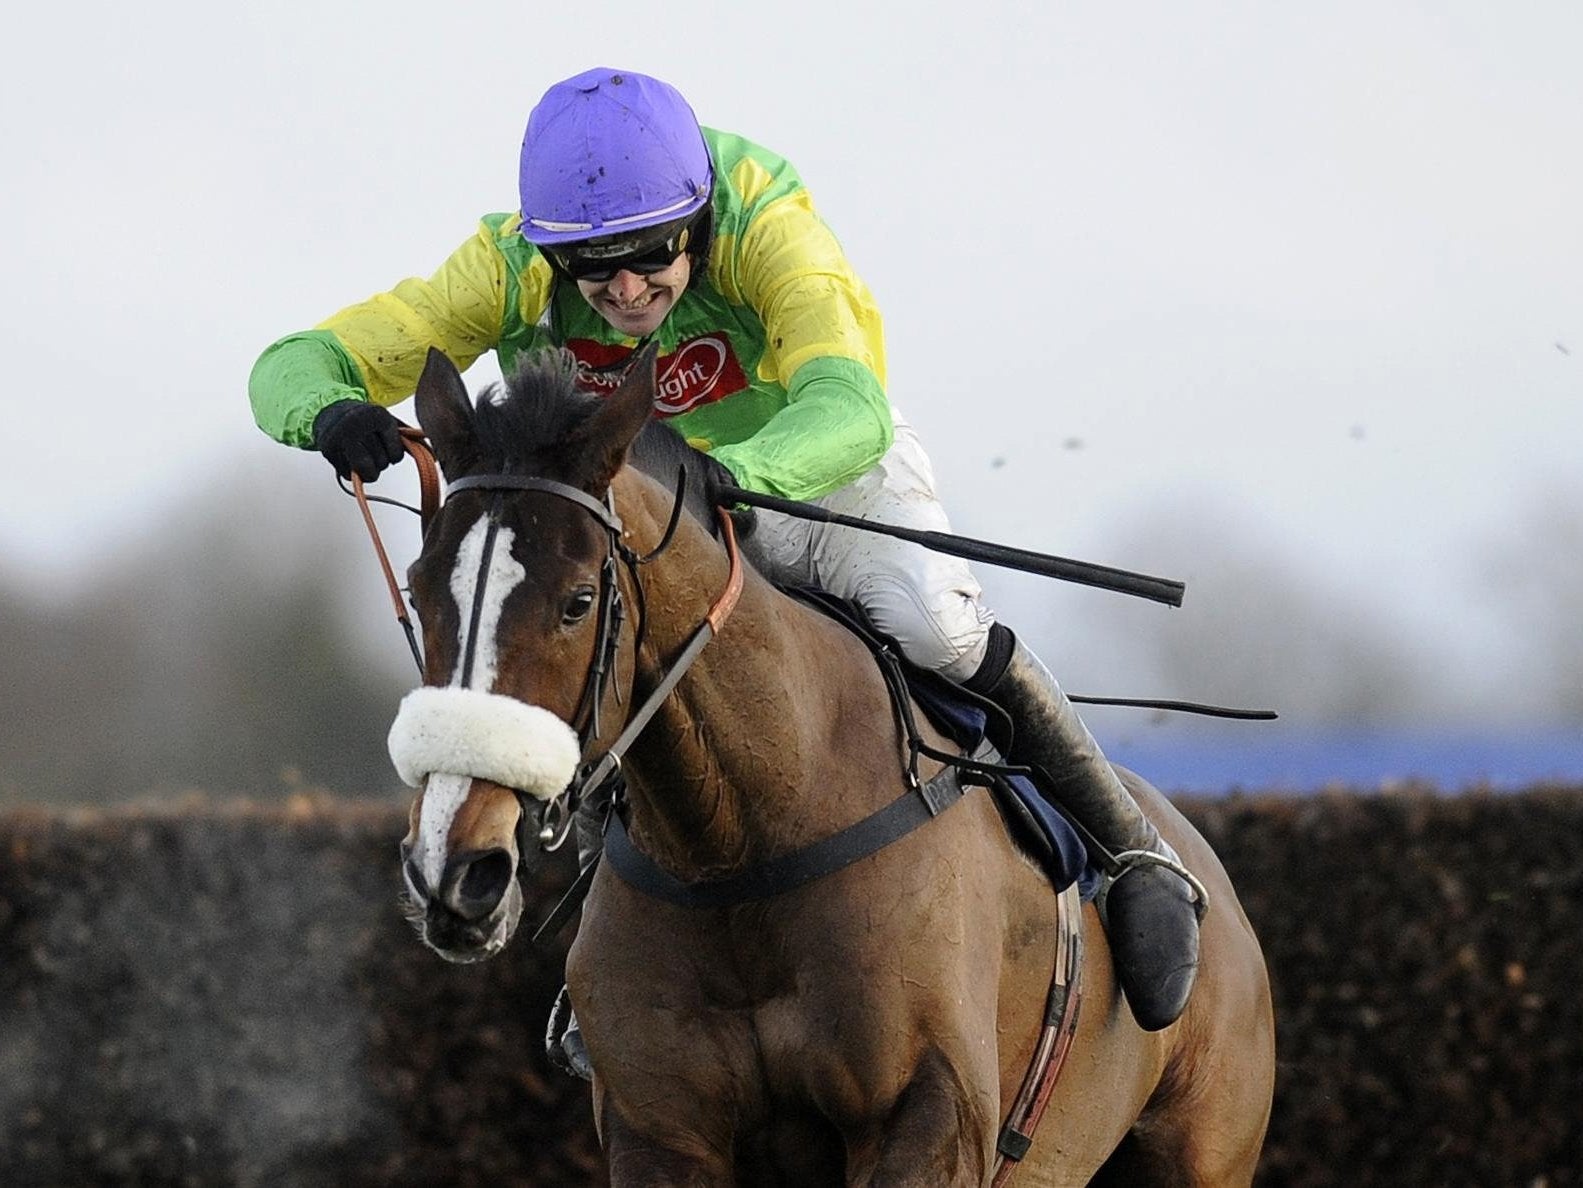 Walsh took more wins at Cheltenham than any other jockey